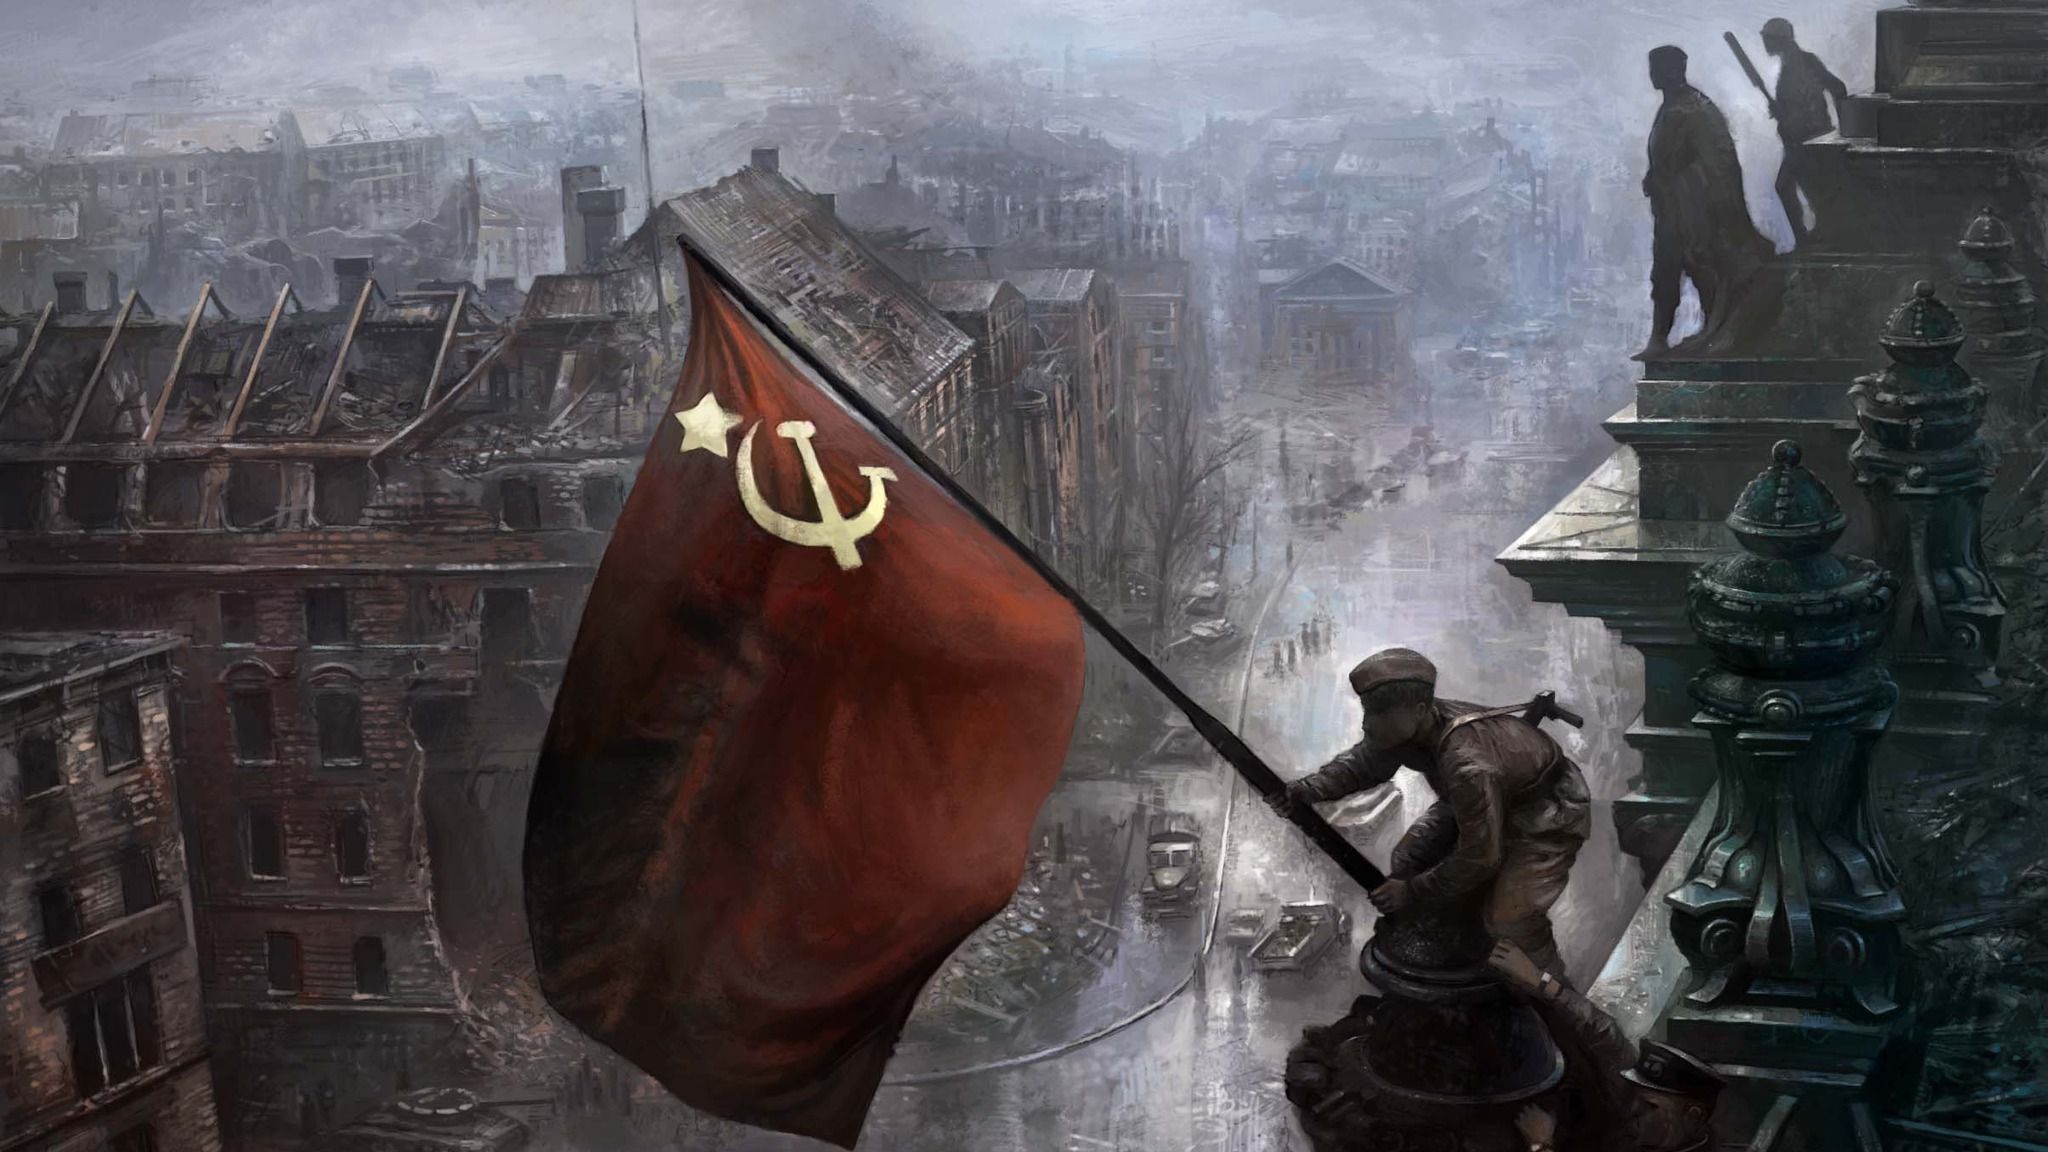 White, Blue, Red Flag: Russia Flag History, Meaning, and Symbolism